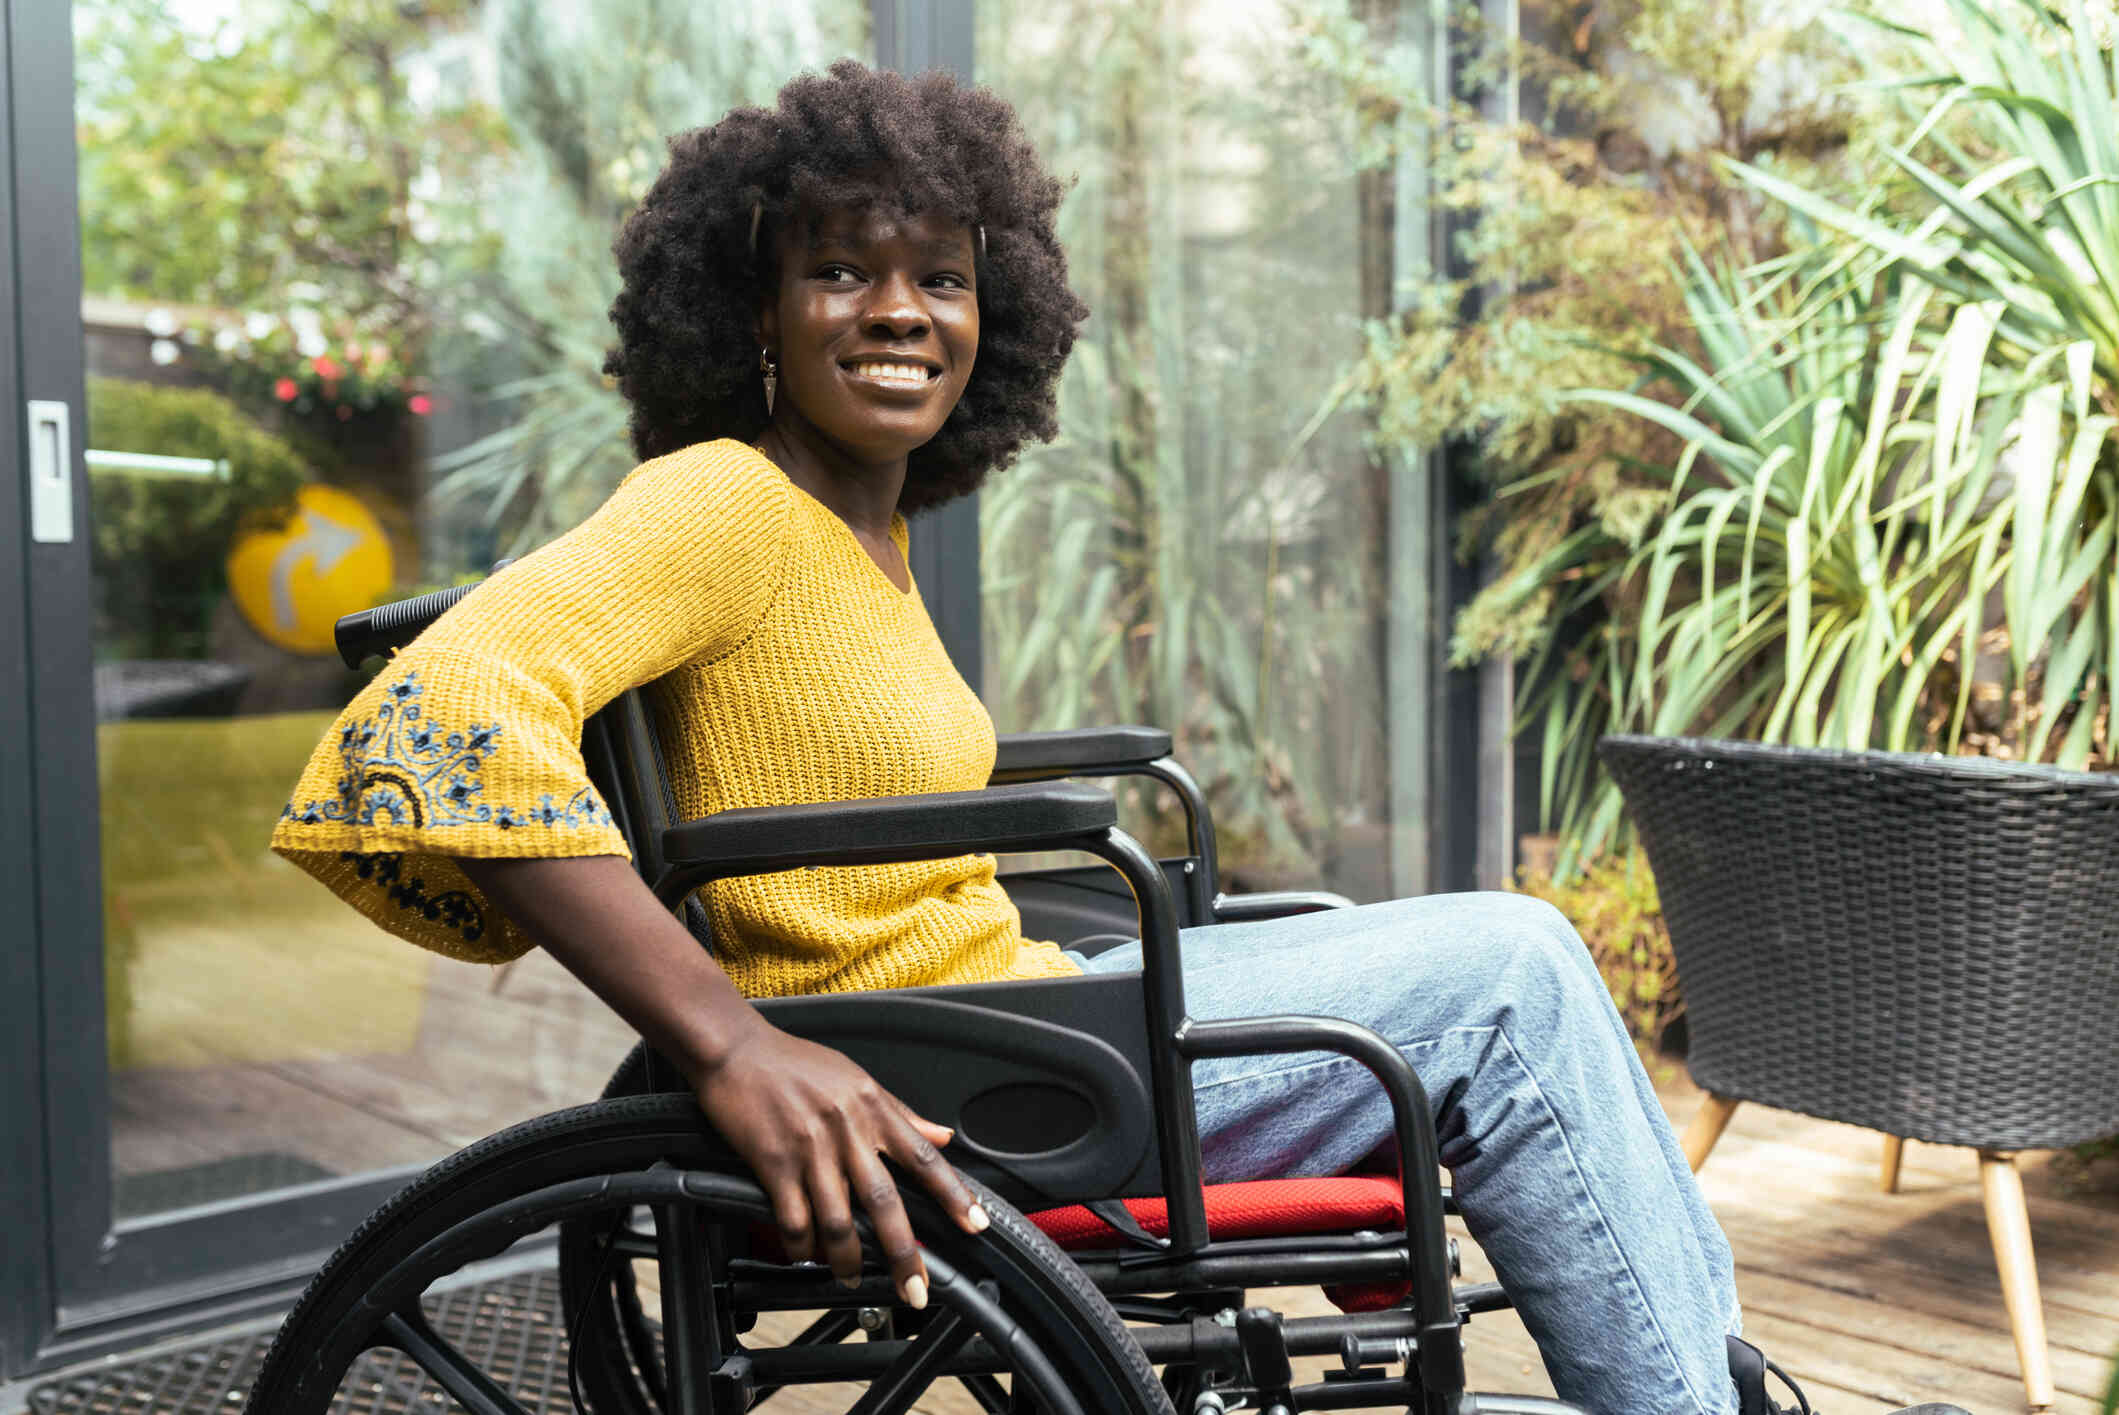 A woman in a yellow shirt sits outside in a wheelchair and smiles brightly while gazing off.